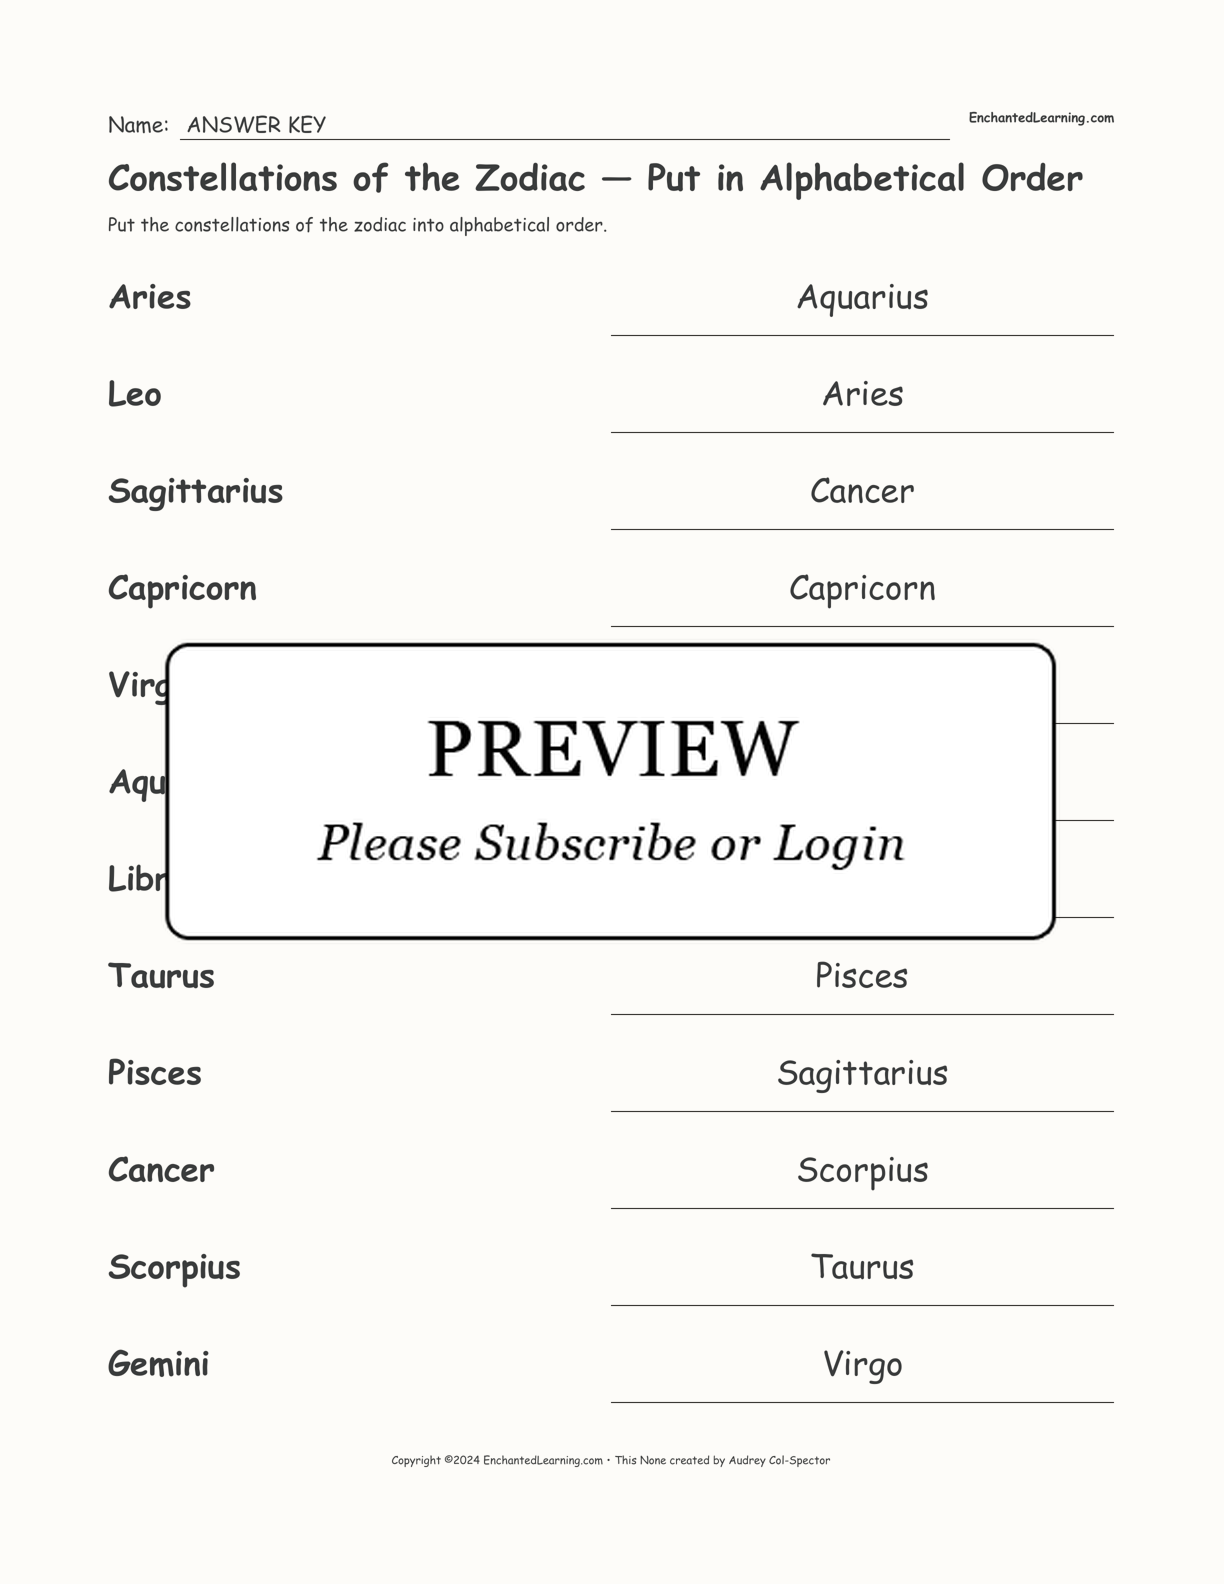 Constellations of the Zodiac — Put in Alphabetical Order interactive worksheet page 2